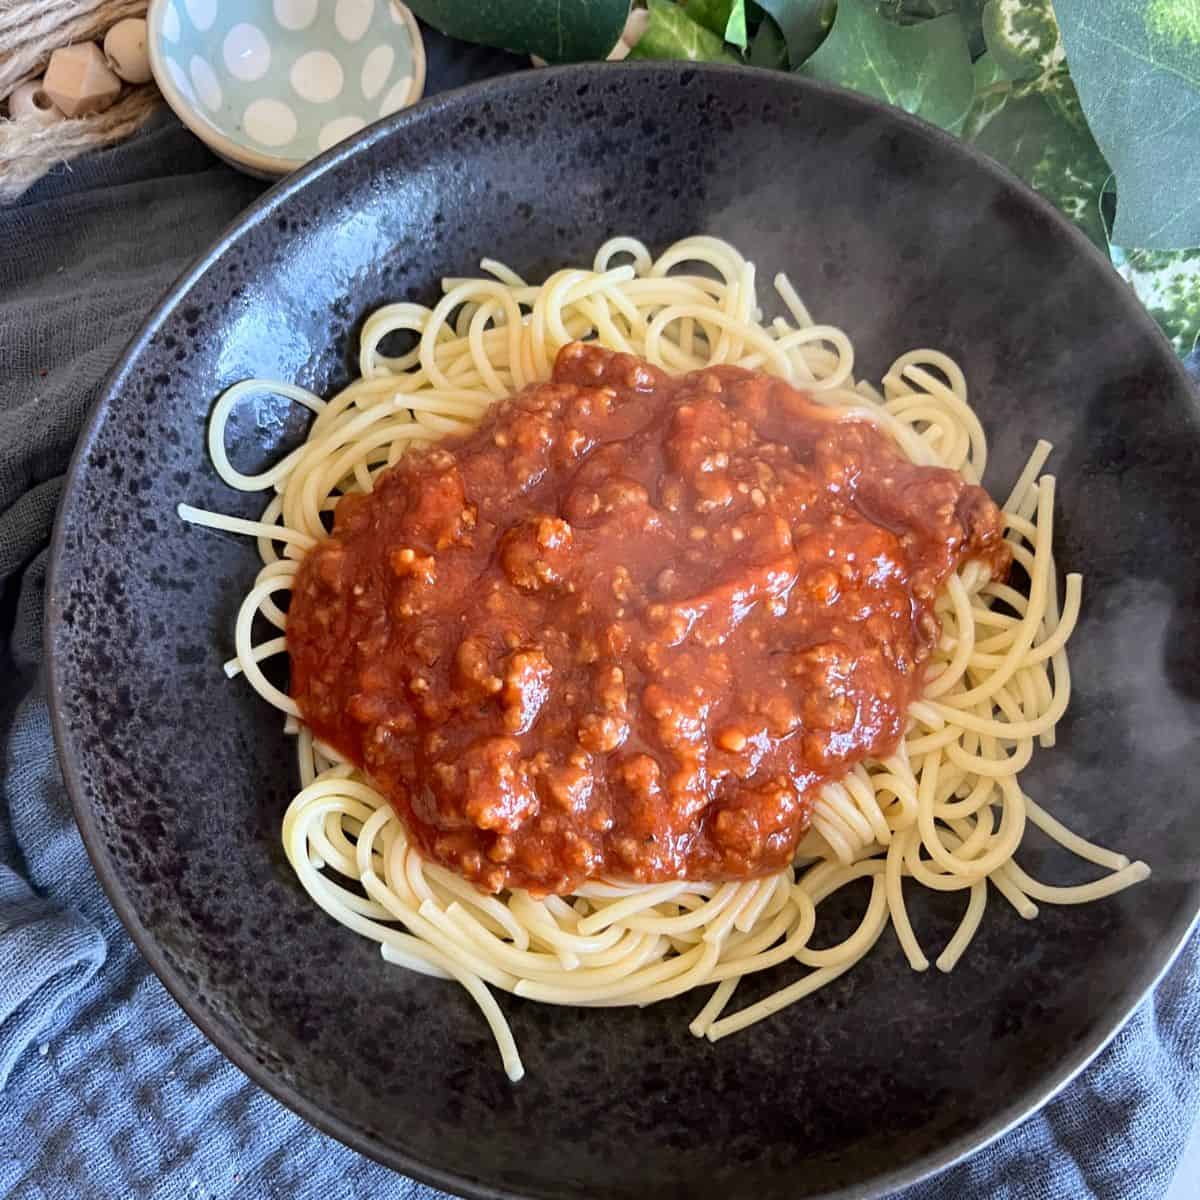 A basic spaghetti sauce recipe made more Weight Watcher friendly by just changing a few simple ingredients around and lightening it up a bit.